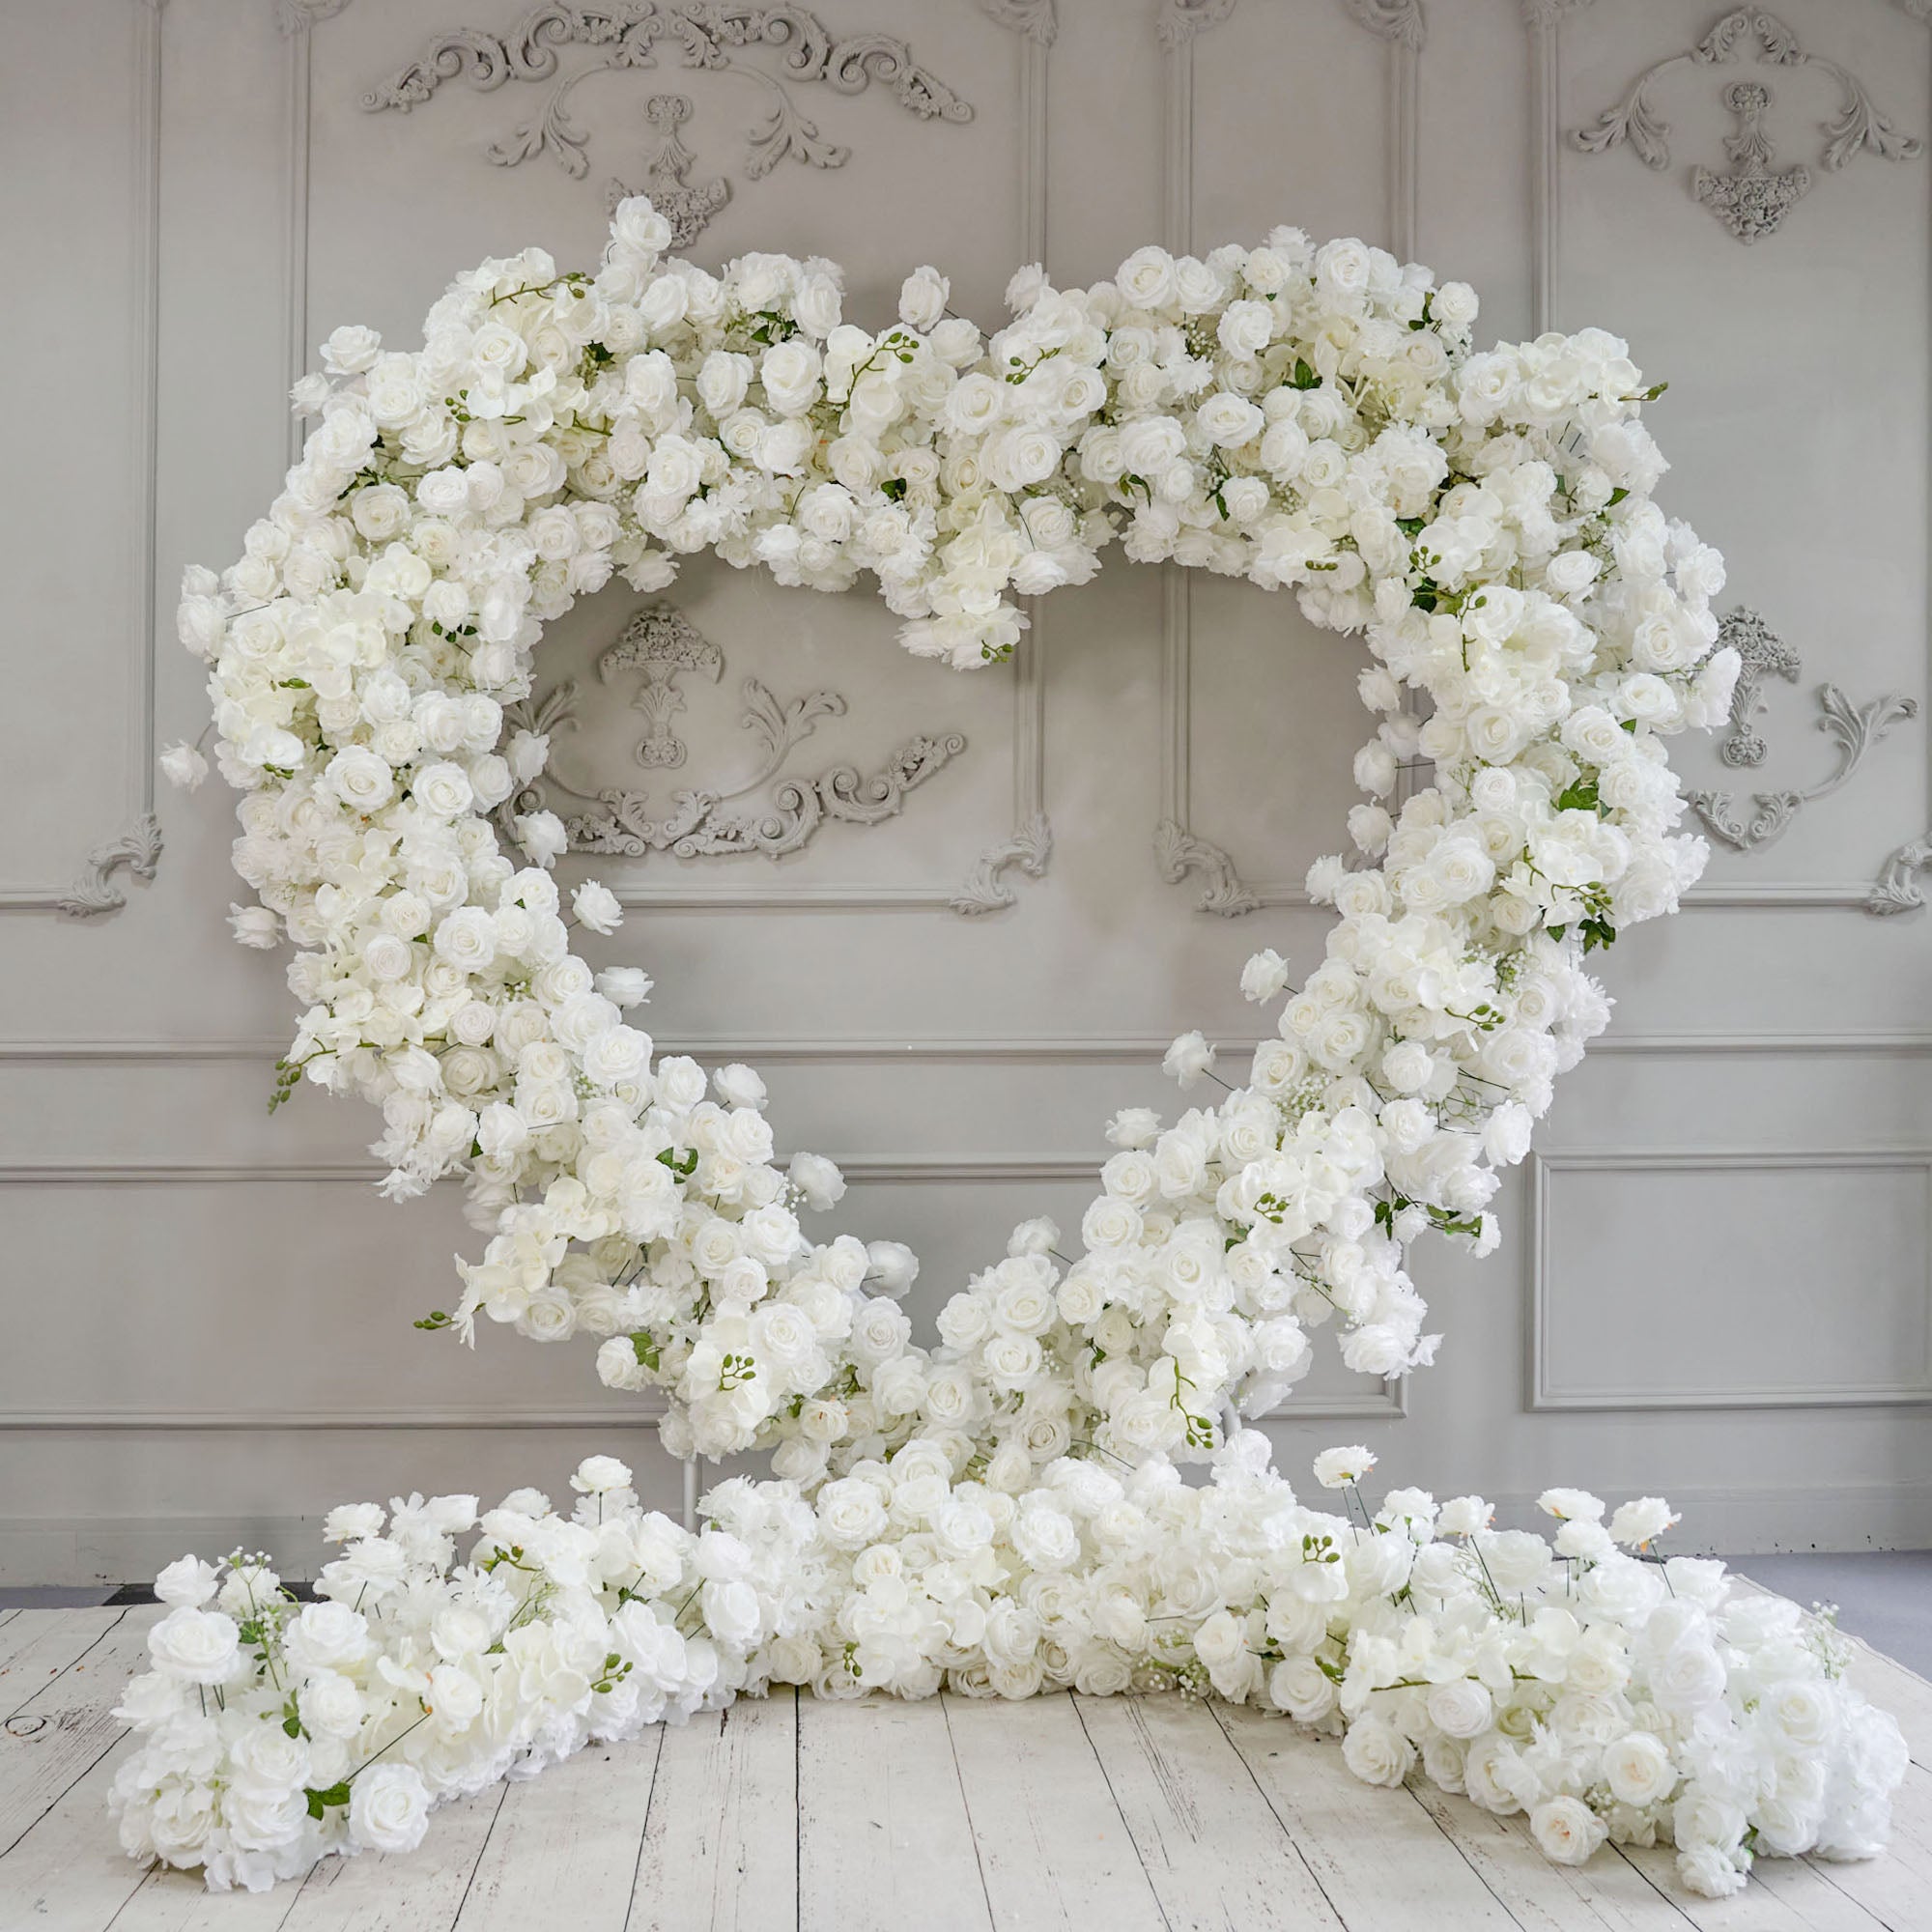 Flower Arch Heart Shaped White Roses Floral Arch Set Proposal Wedding Party Decor